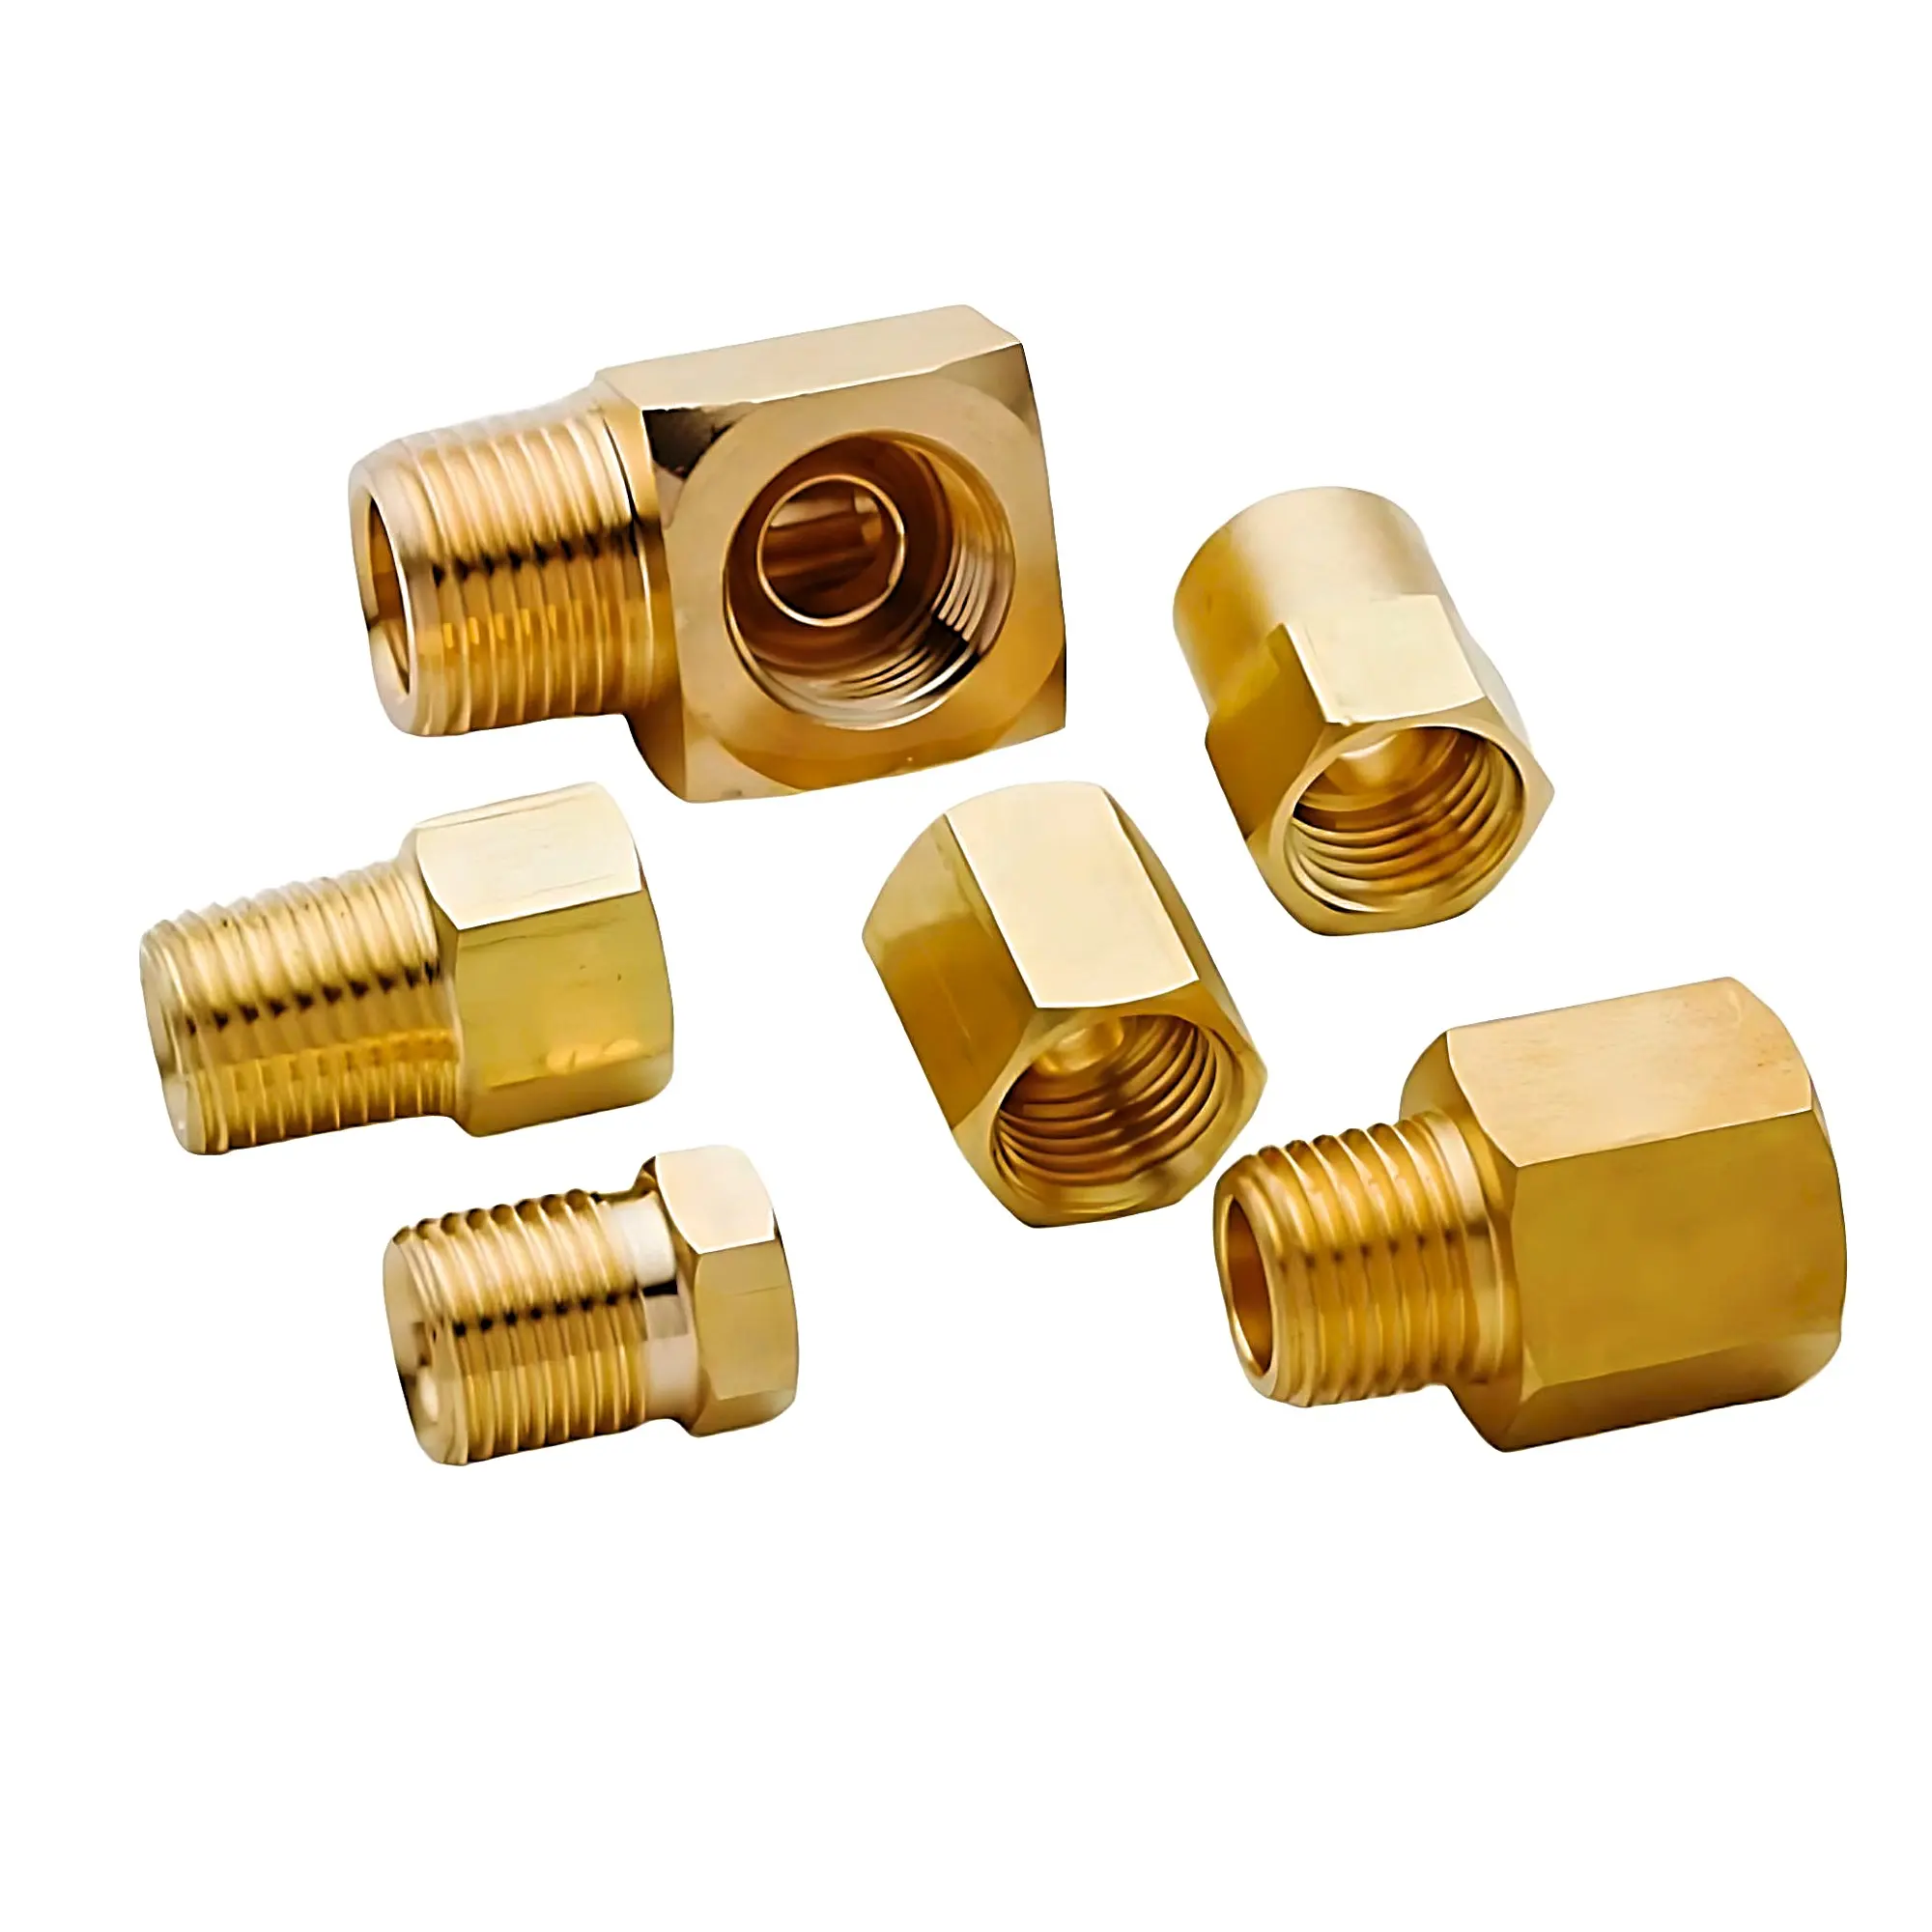 Brass Stainless Steel MS Metric Fuel Line 3an Brake Line Fittings Inverted & Bubble Flare Elbow Union Tee Banjo Bolt Connectors